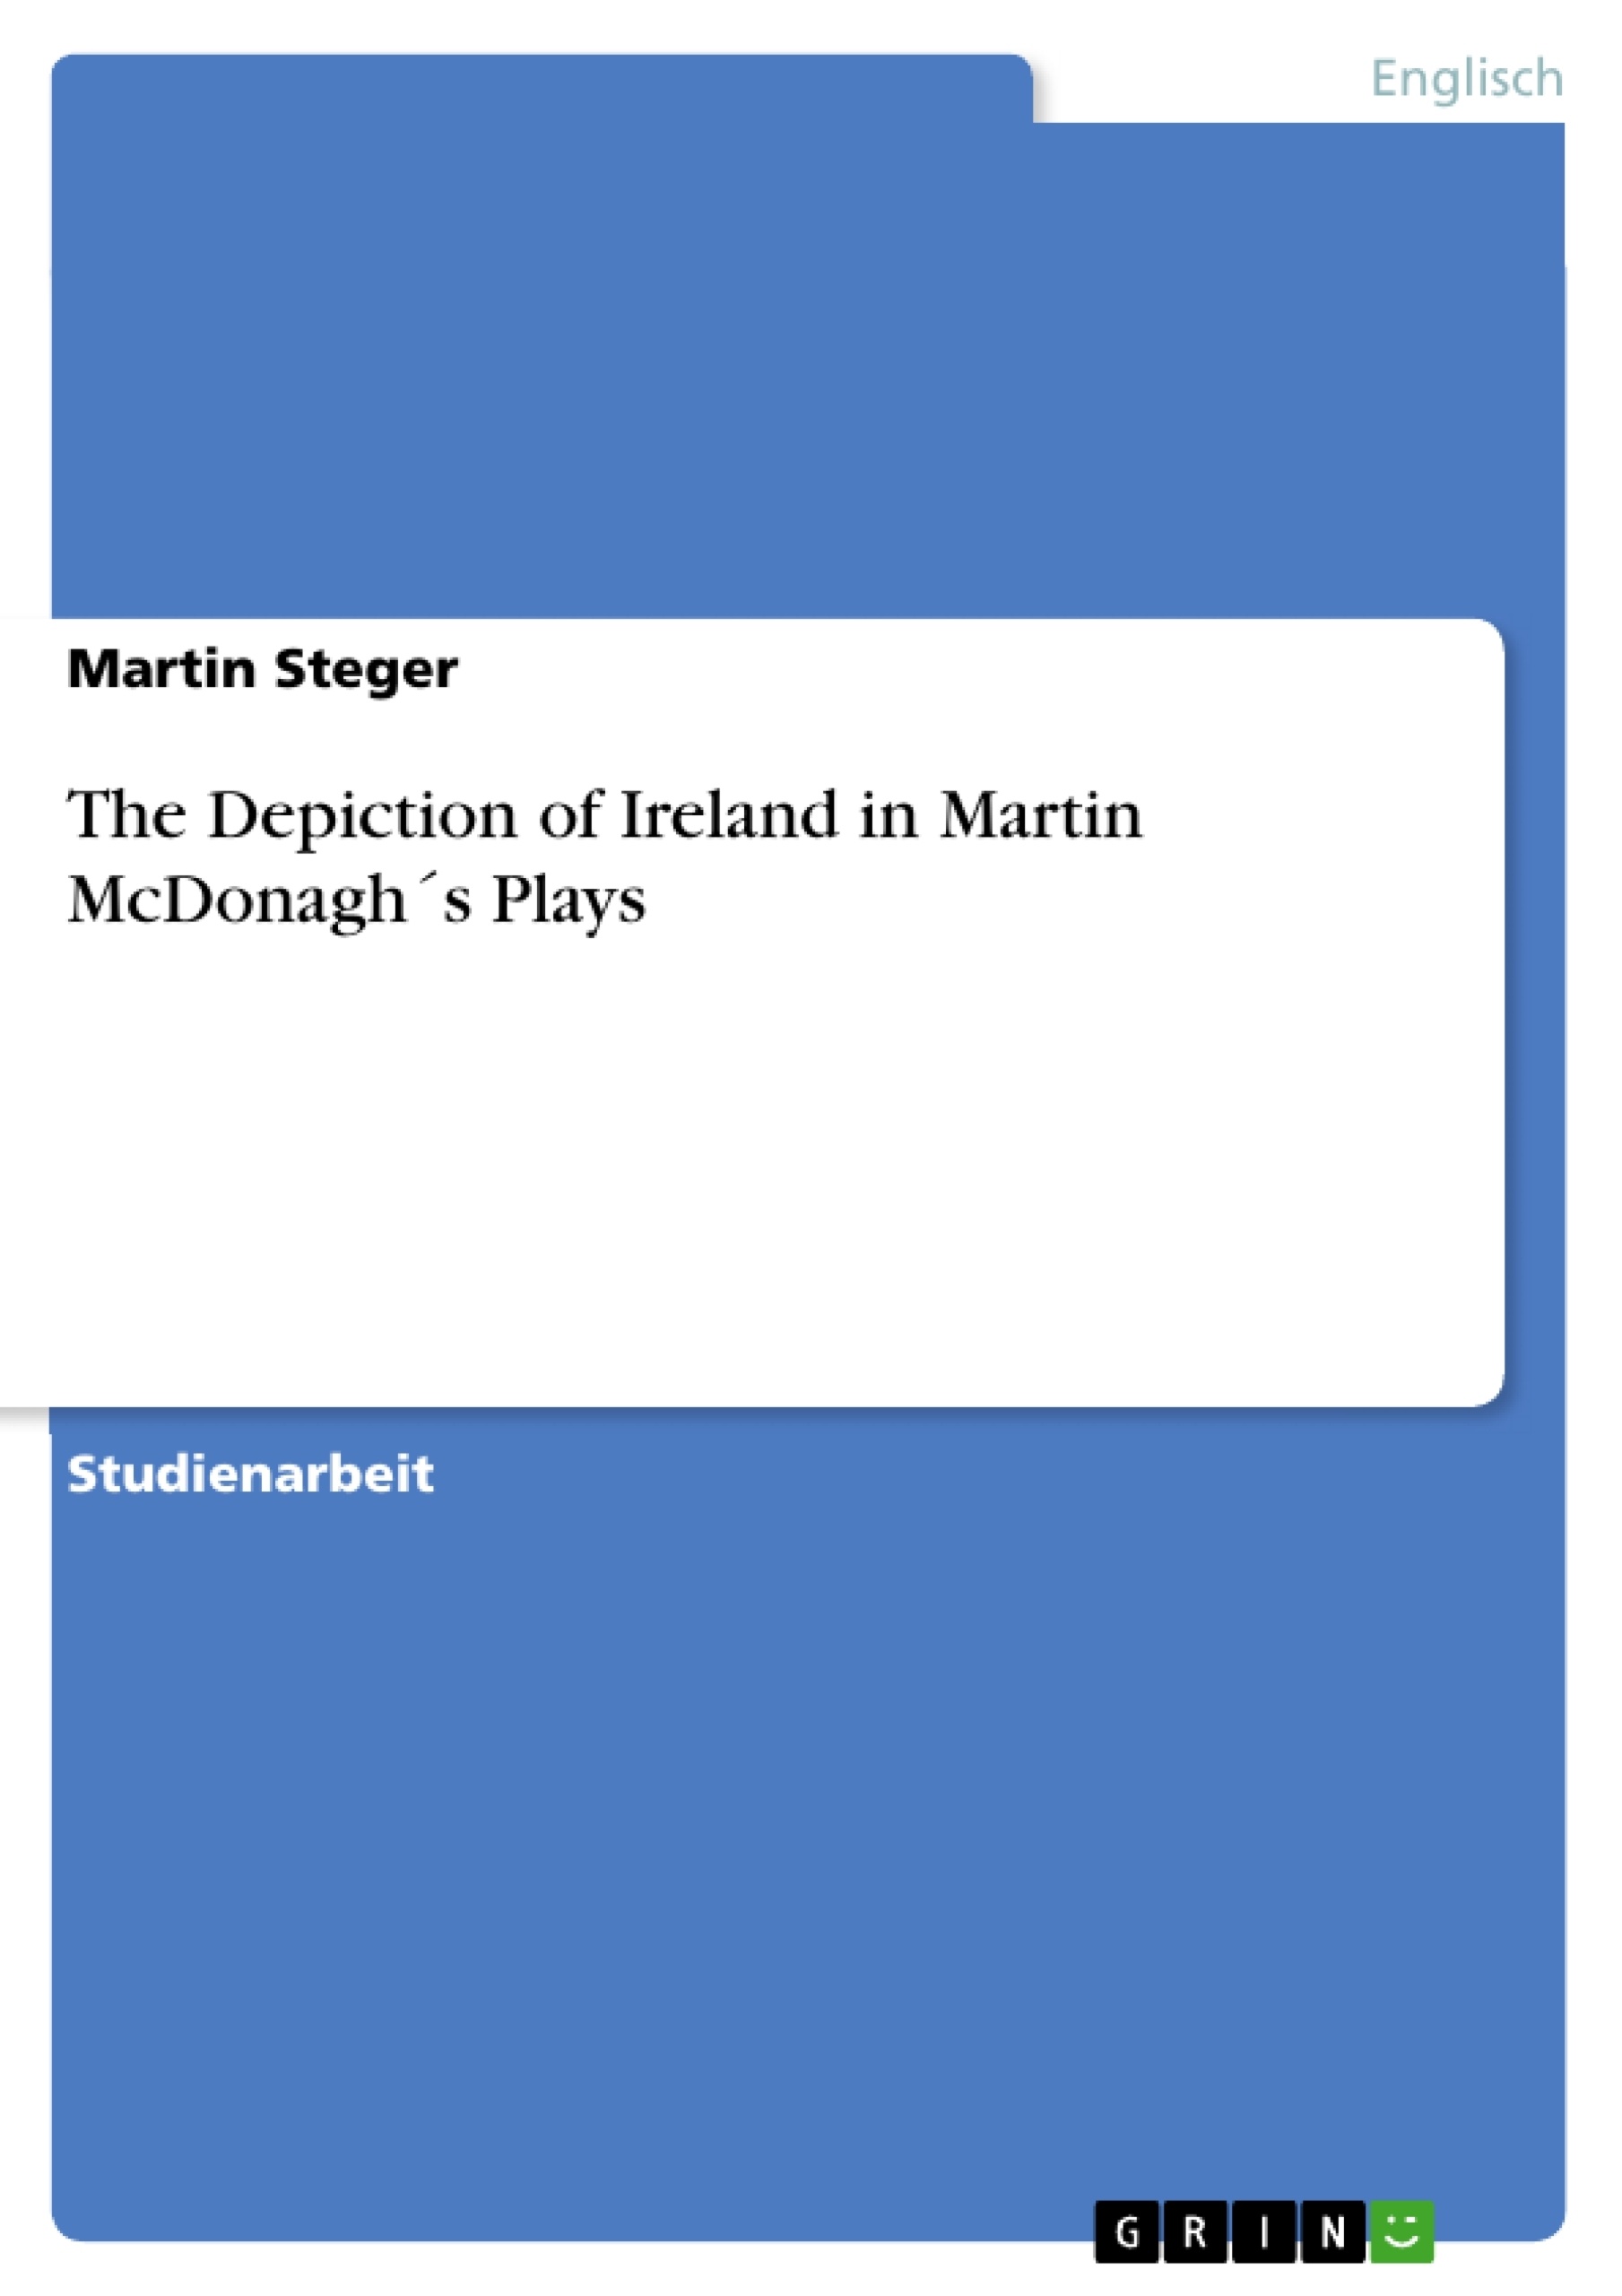 Título: The Depiction of Ireland in Martin McDonagh´s Plays